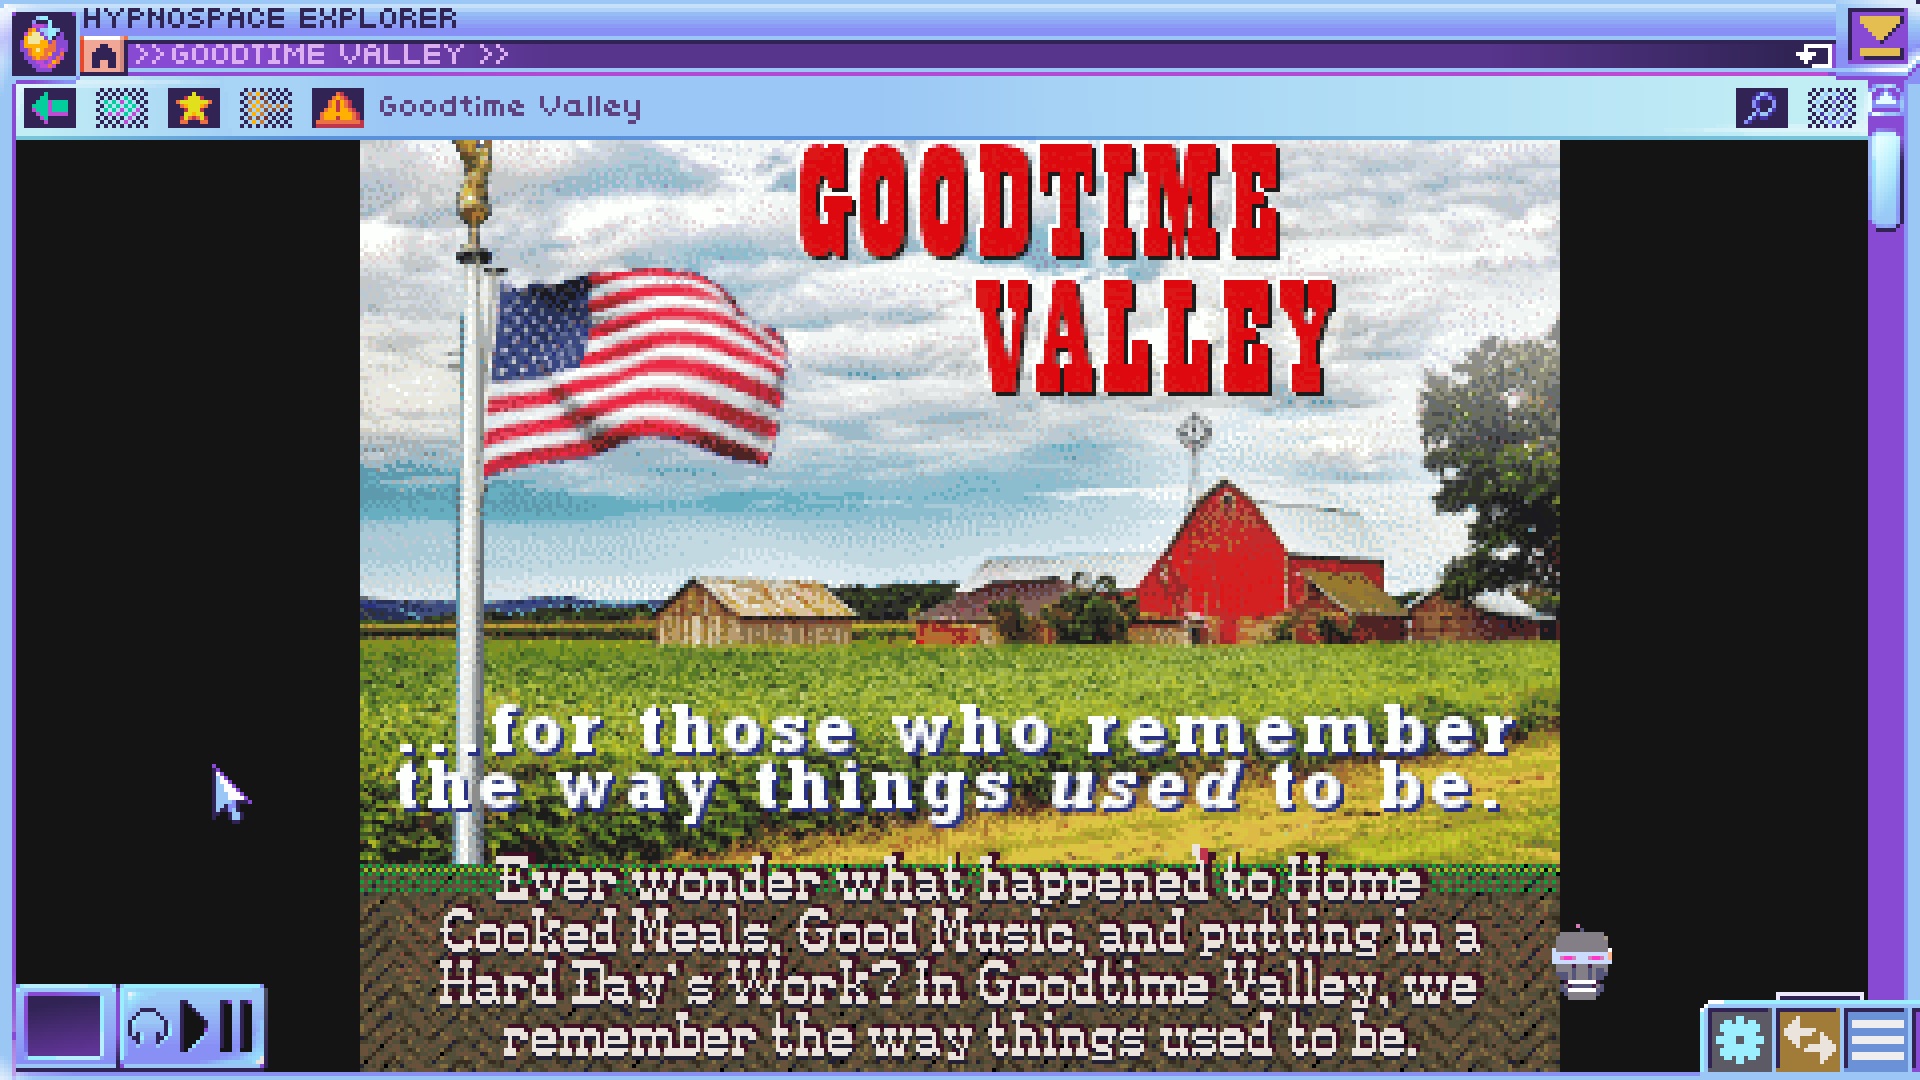 Perverse Incentives: Hypnospace Outlaw, Player-Antagonism and Digital Propaganda of the Deed